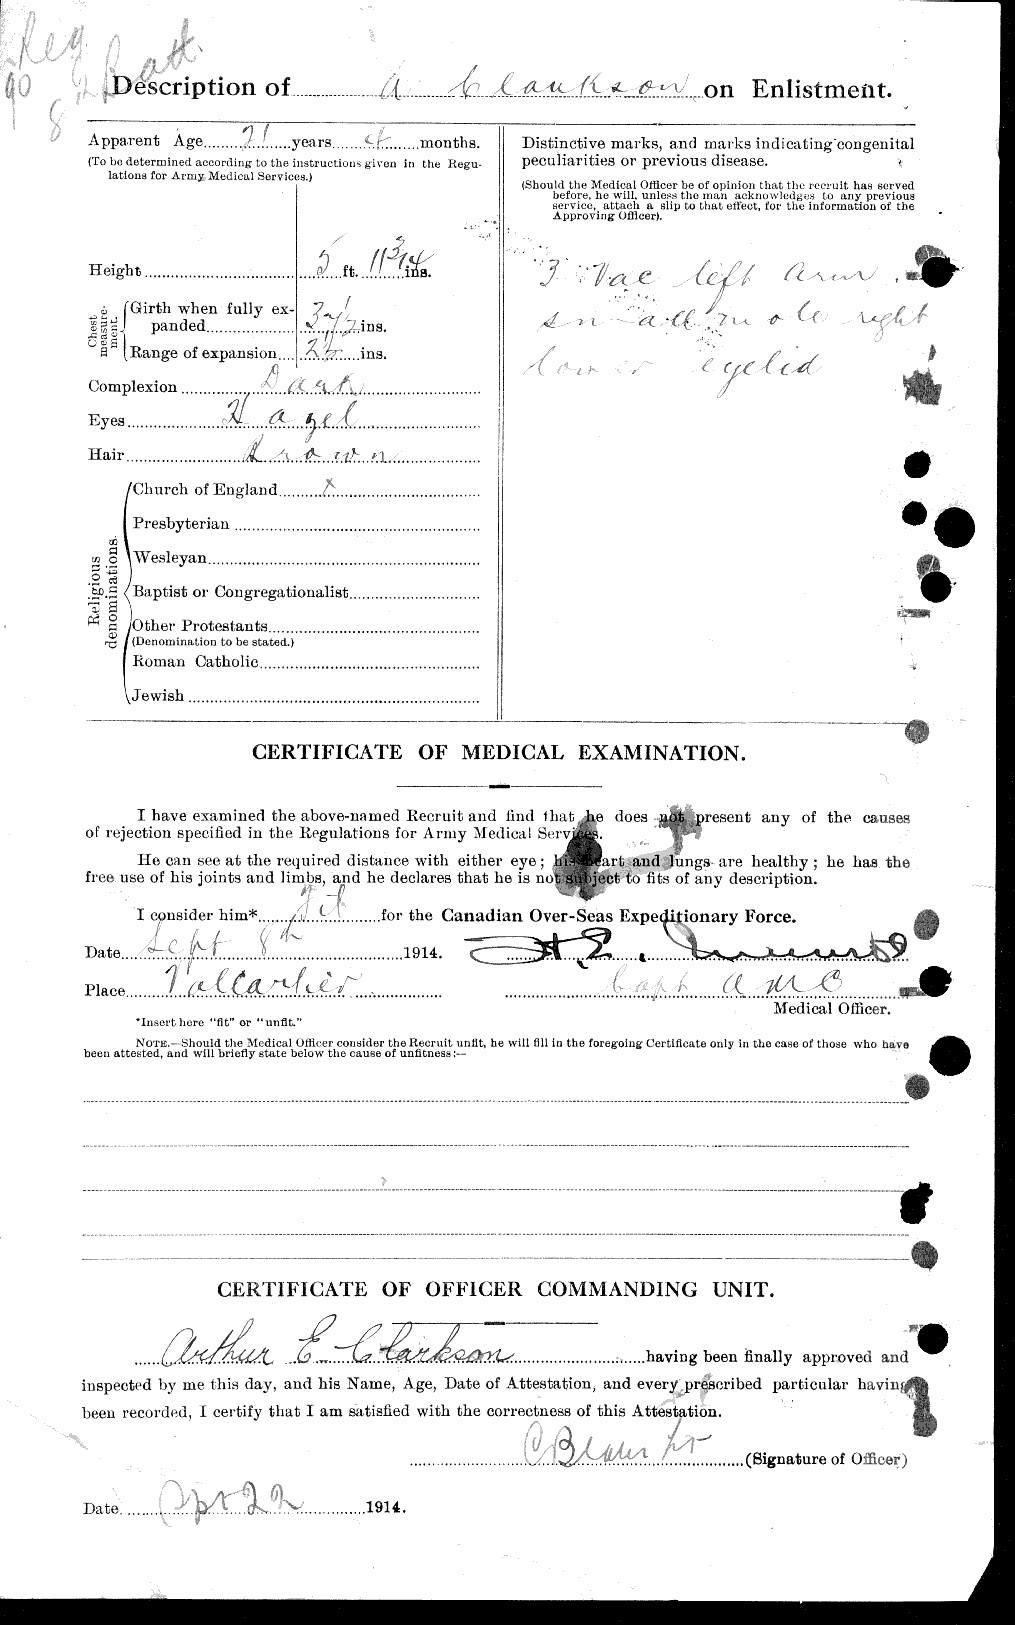 Personnel Records of the First World War - CEF 023617b